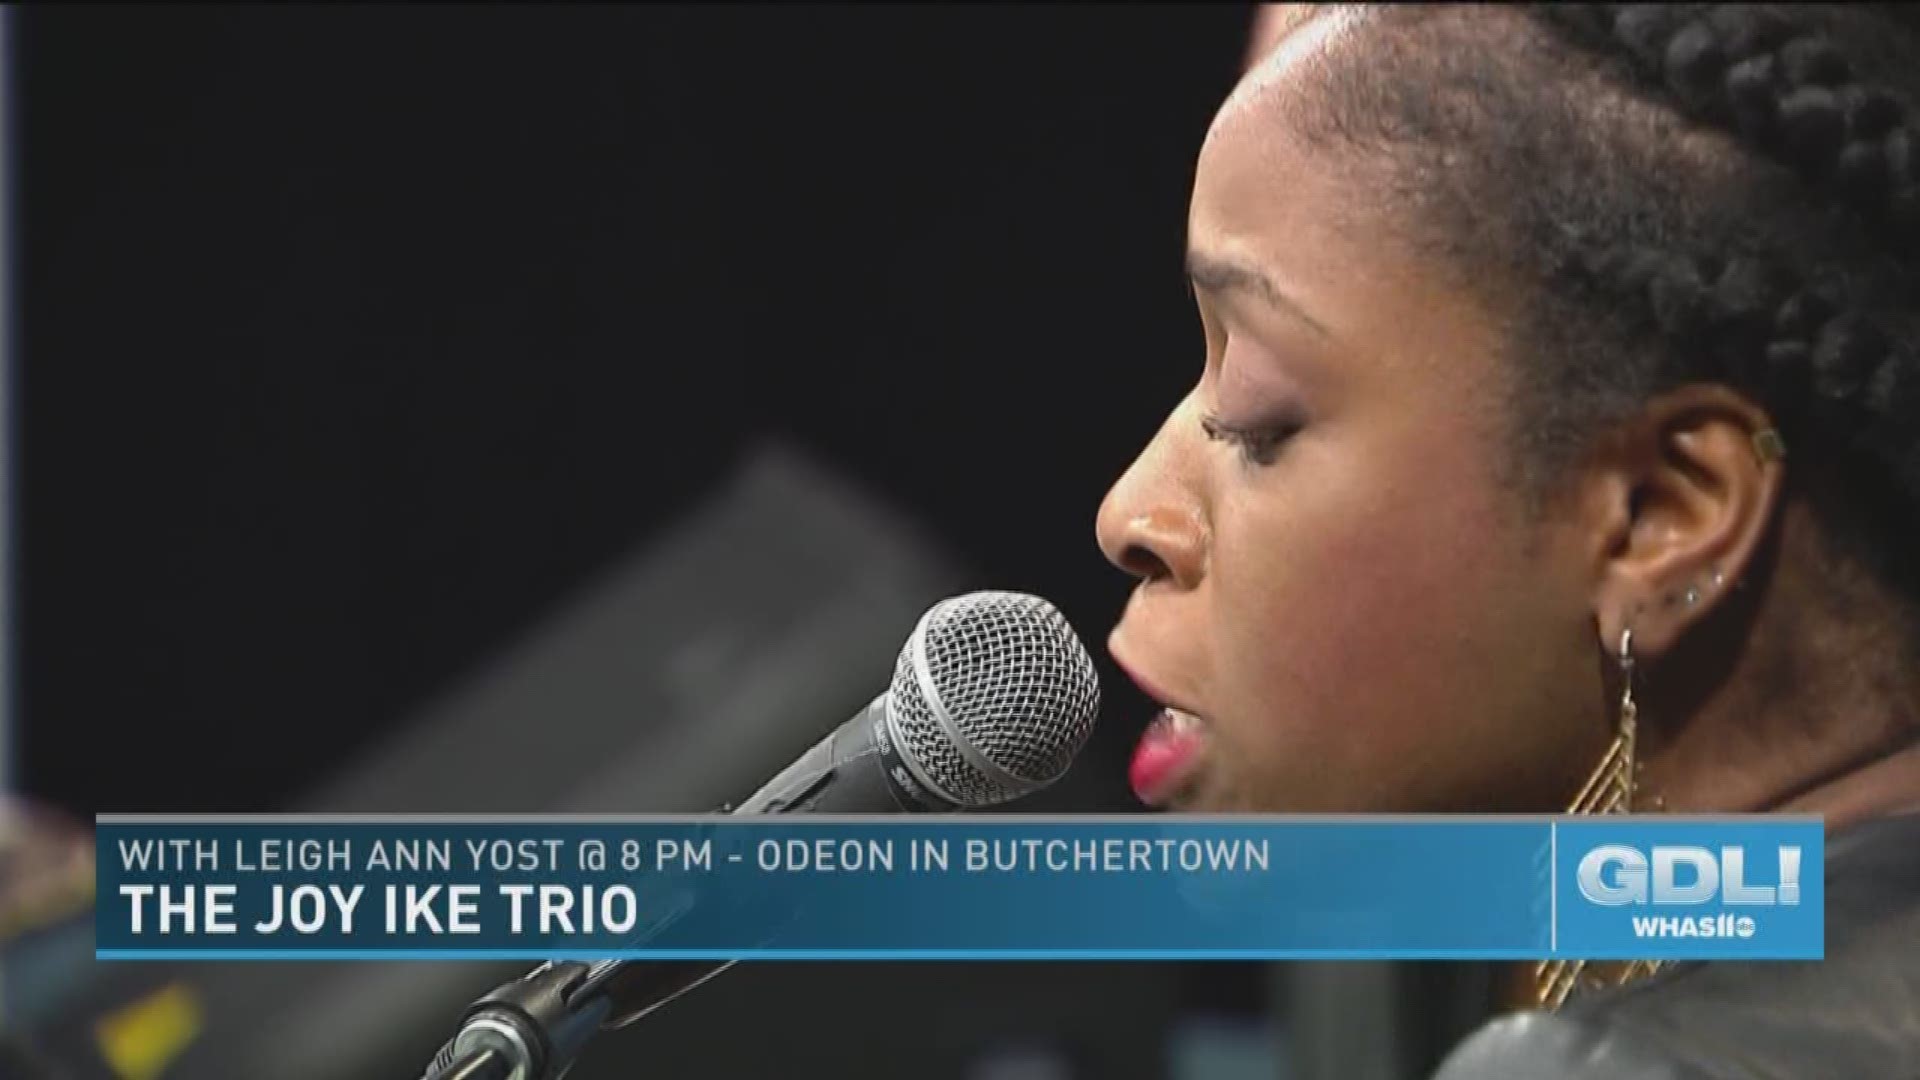 The Joy Ike Trio performs and original song on Great Day Live!